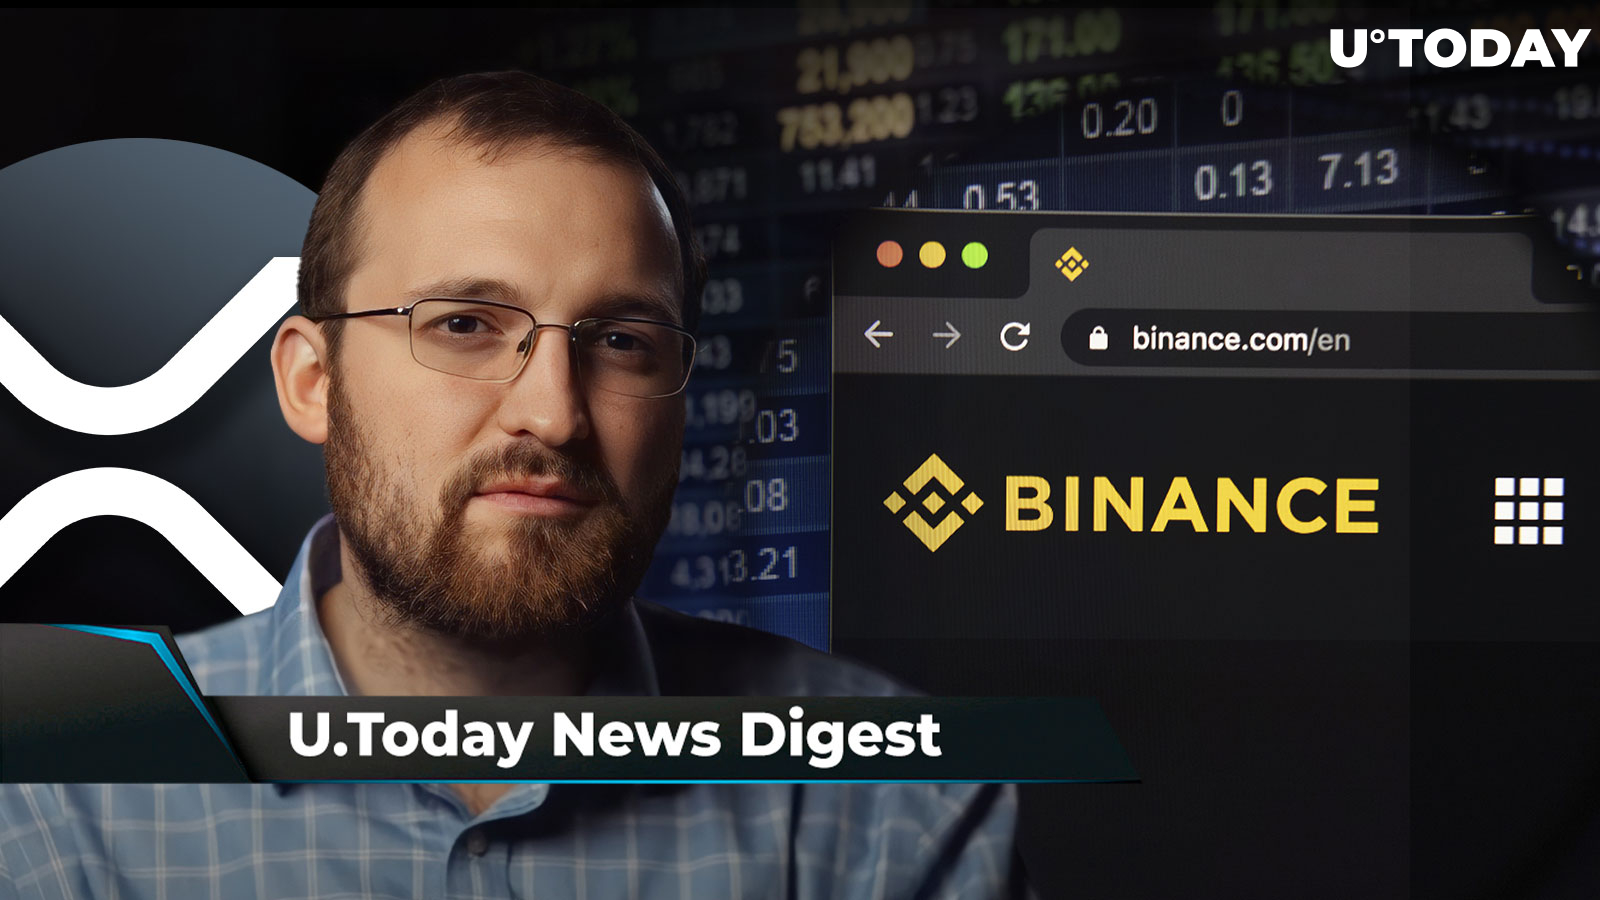 Cardano Founder Wants Truce With XRP Community, Binance Silently Changes Terms of Service, Ripple Top Lawyer Slams SEC Hypocrisy: Crypto News Digest by U.Today